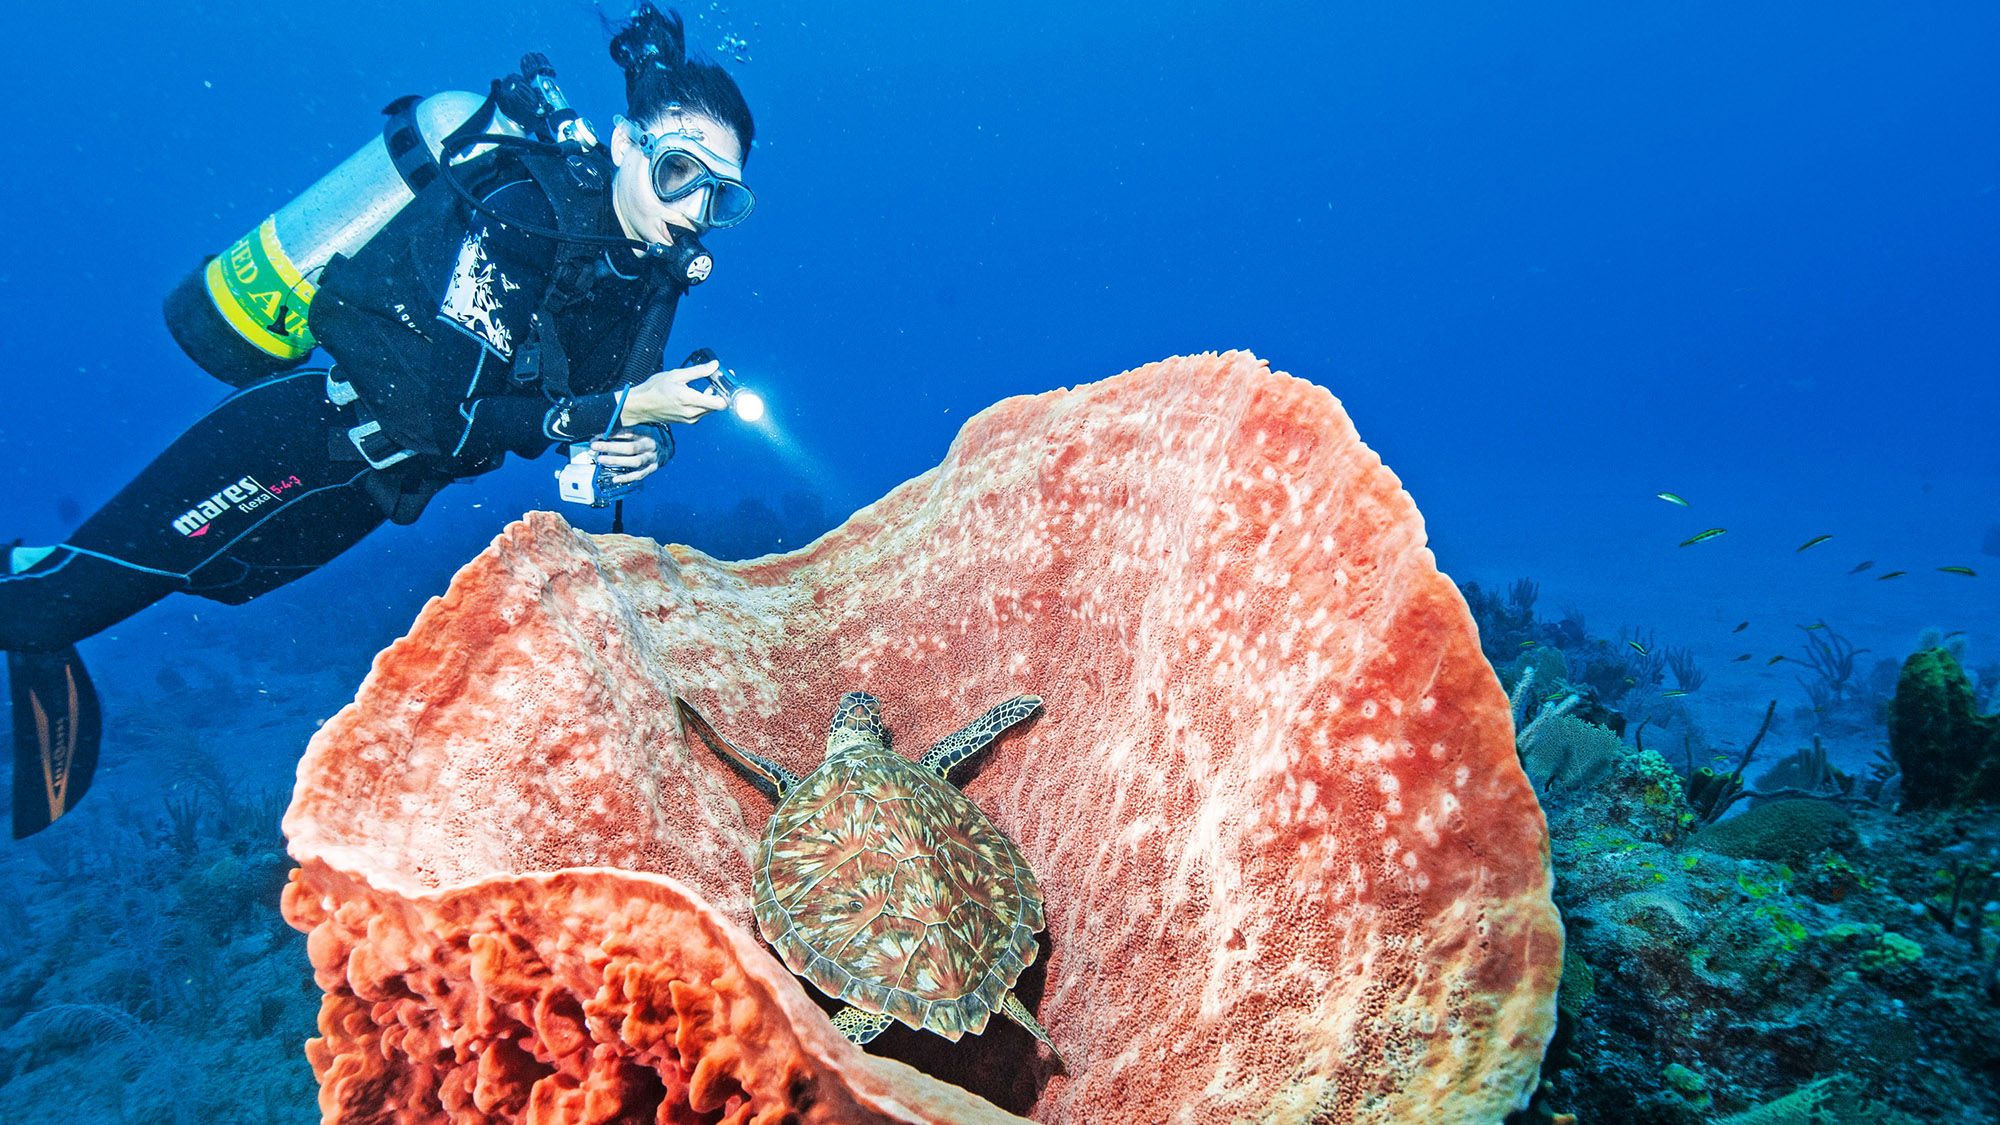 A diver encounters a turtle on a barrel sponge in the waters off St. Eustatius.